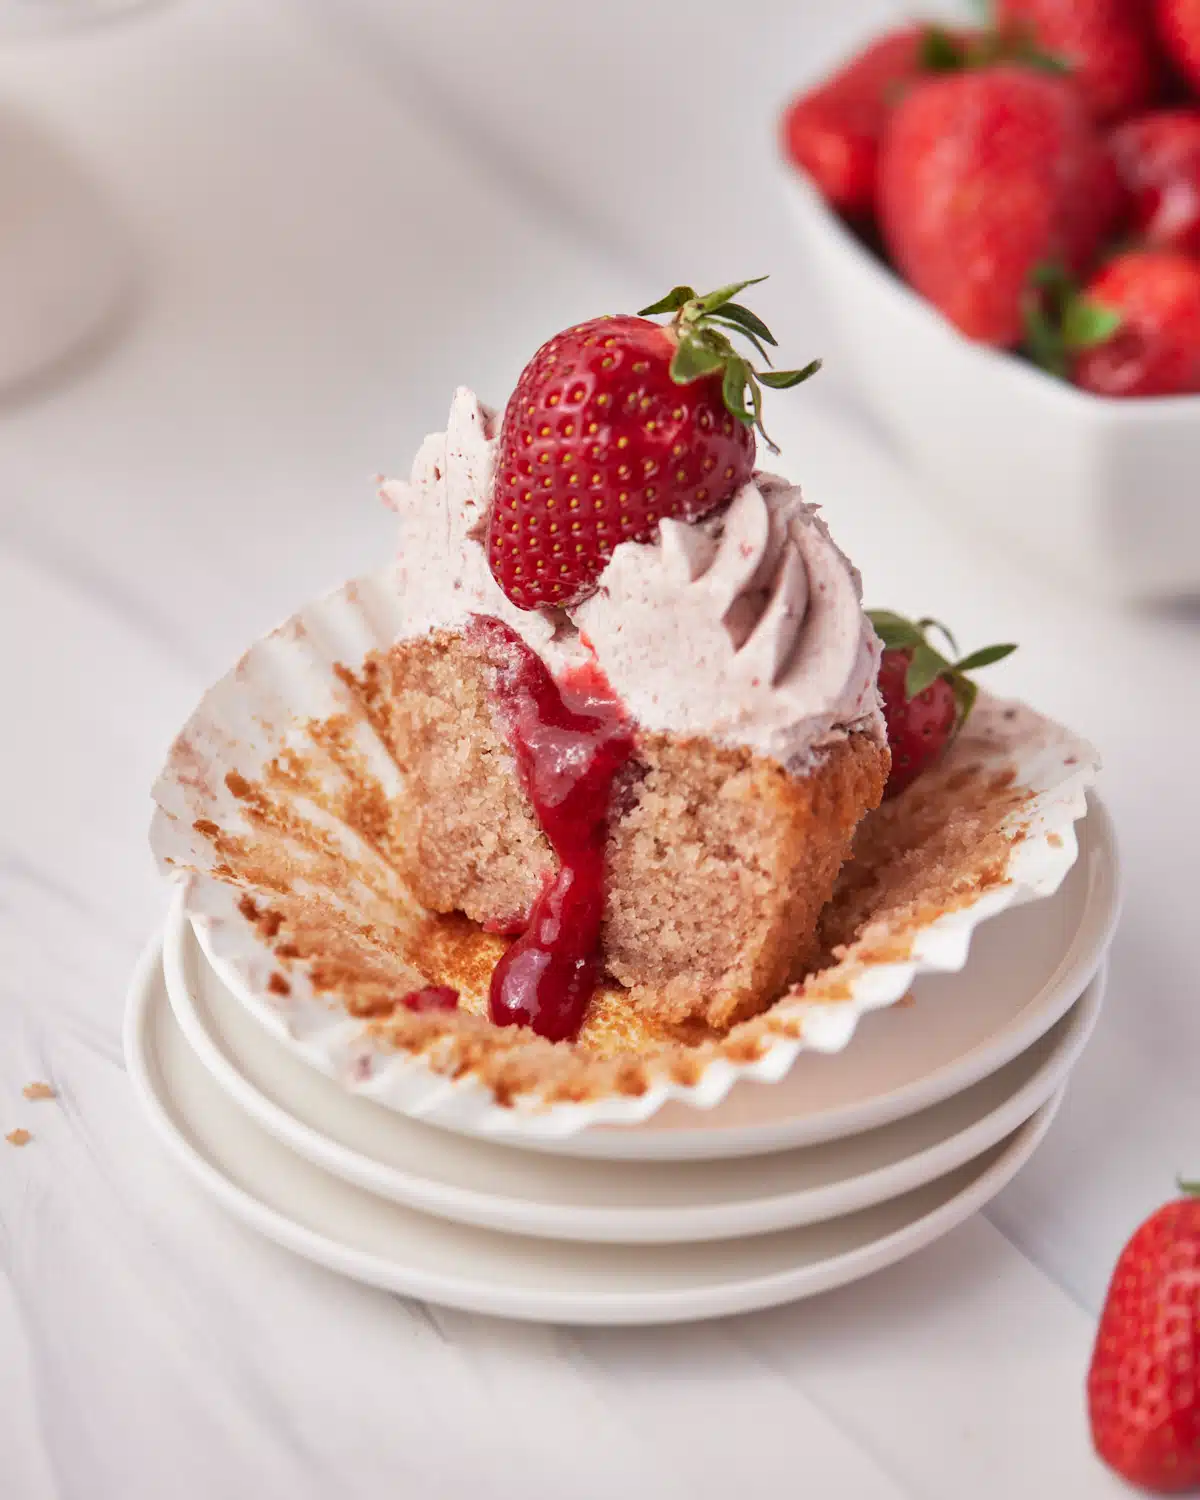 strawberry cupcake with strawberry coulis filling - cut in half to show filling oozing out. 